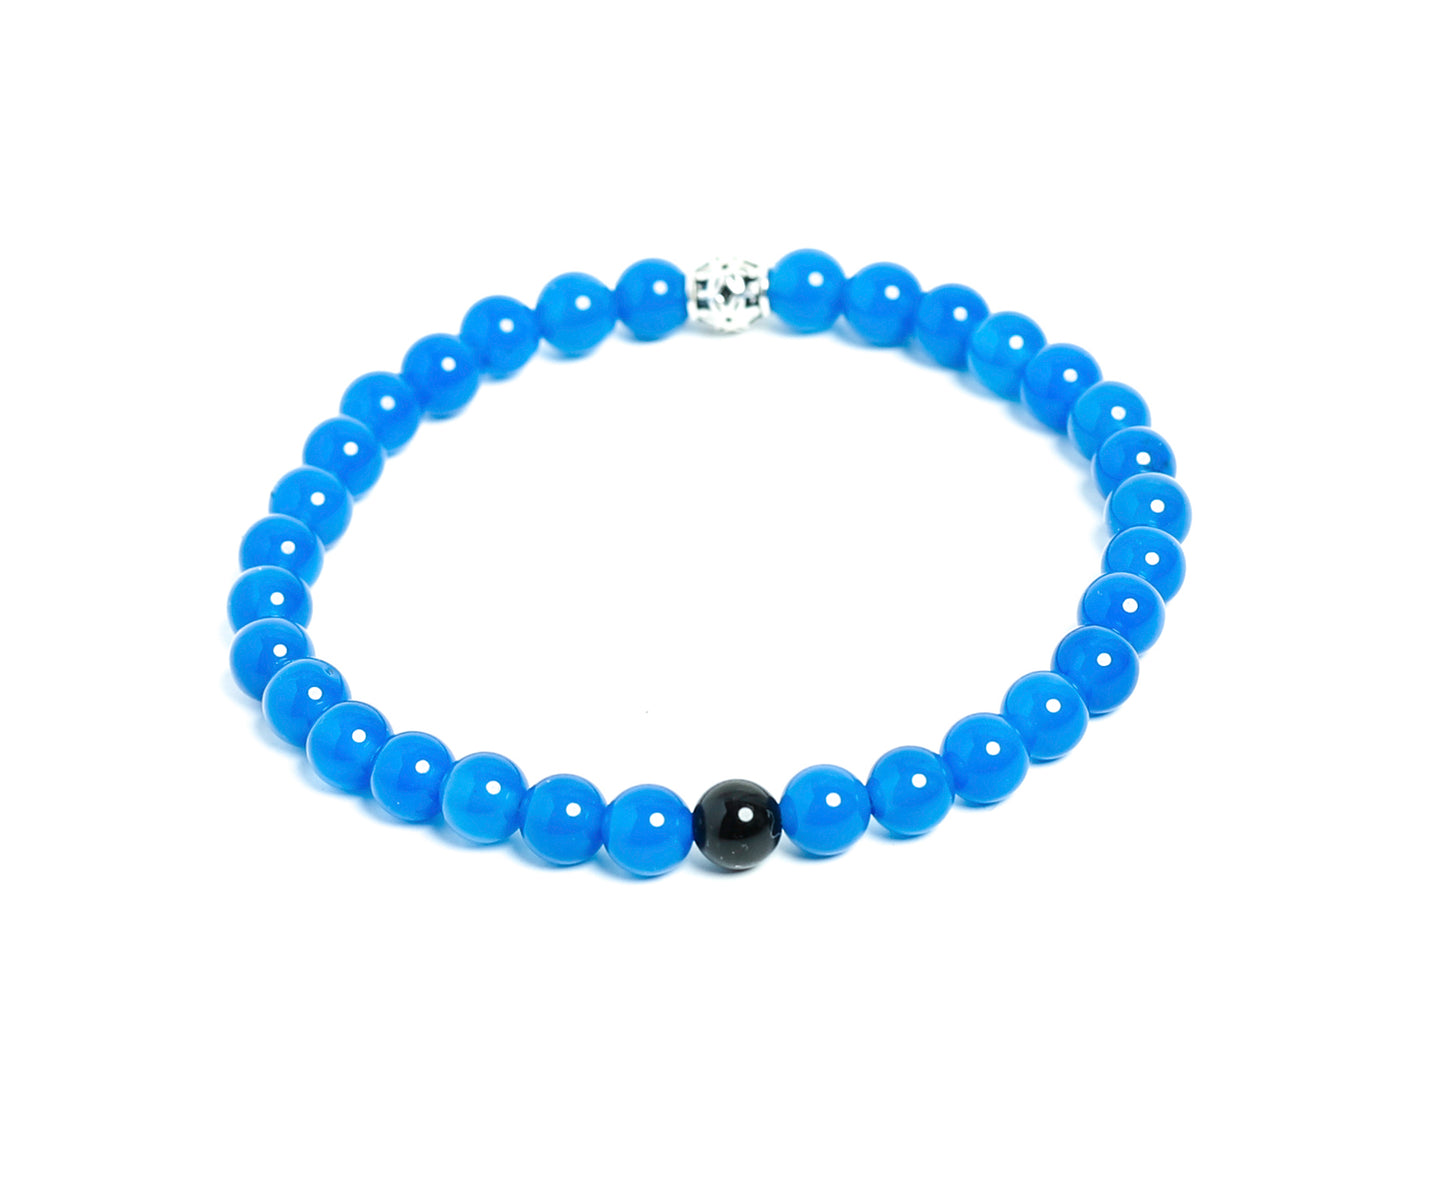 Custom made Premium Mens Jewelry with Blue Beads silver charm at RM KANDY